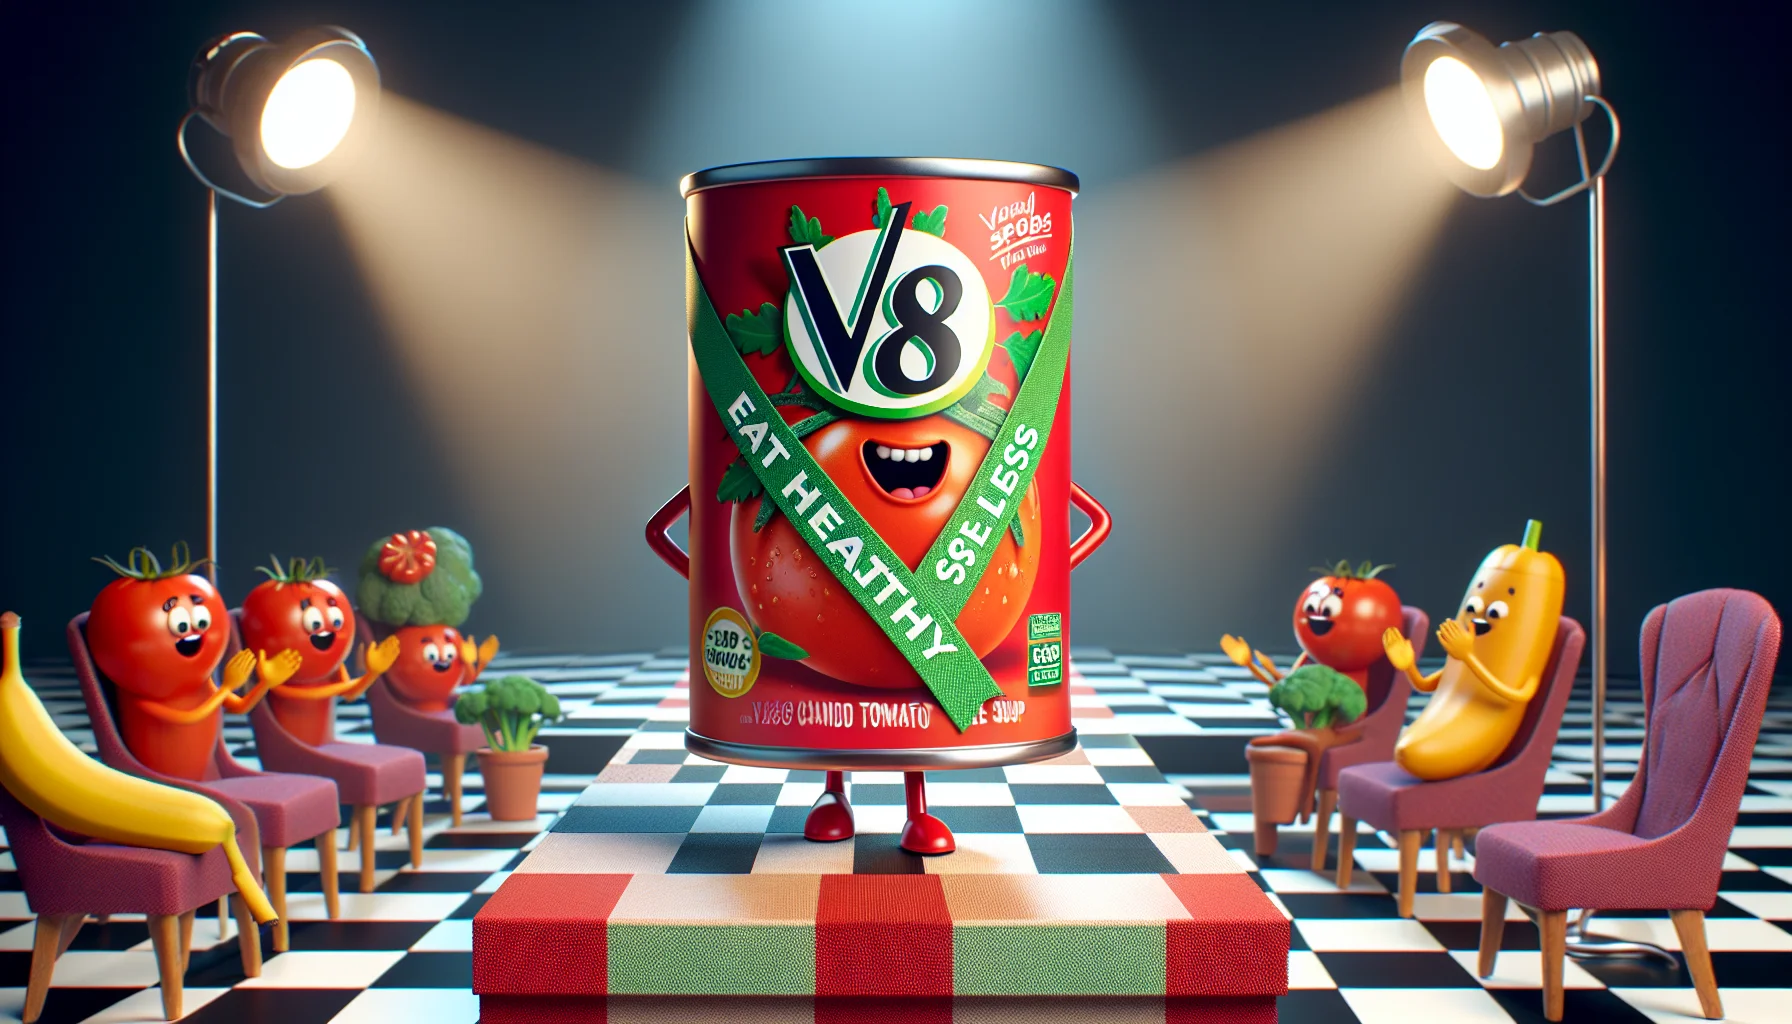 Compose an image of a whimsical scenario featuring a can of V8 tomato soup. The can is personified with animated eyes and a cheerful smile, acting as an ambassador of health and discount. It's actively participating in a mock fashion show, wearing a colorful sash that reads 'Eat Healthy, Spend Less.' The 'runway' is a checkered kitchen countertop, with food items applauding on the sides. There is a bright spotlight shining on it, adding drama to the scene, capturing the essence of affordability and nutritional benefits in a humorous and realistic manner.